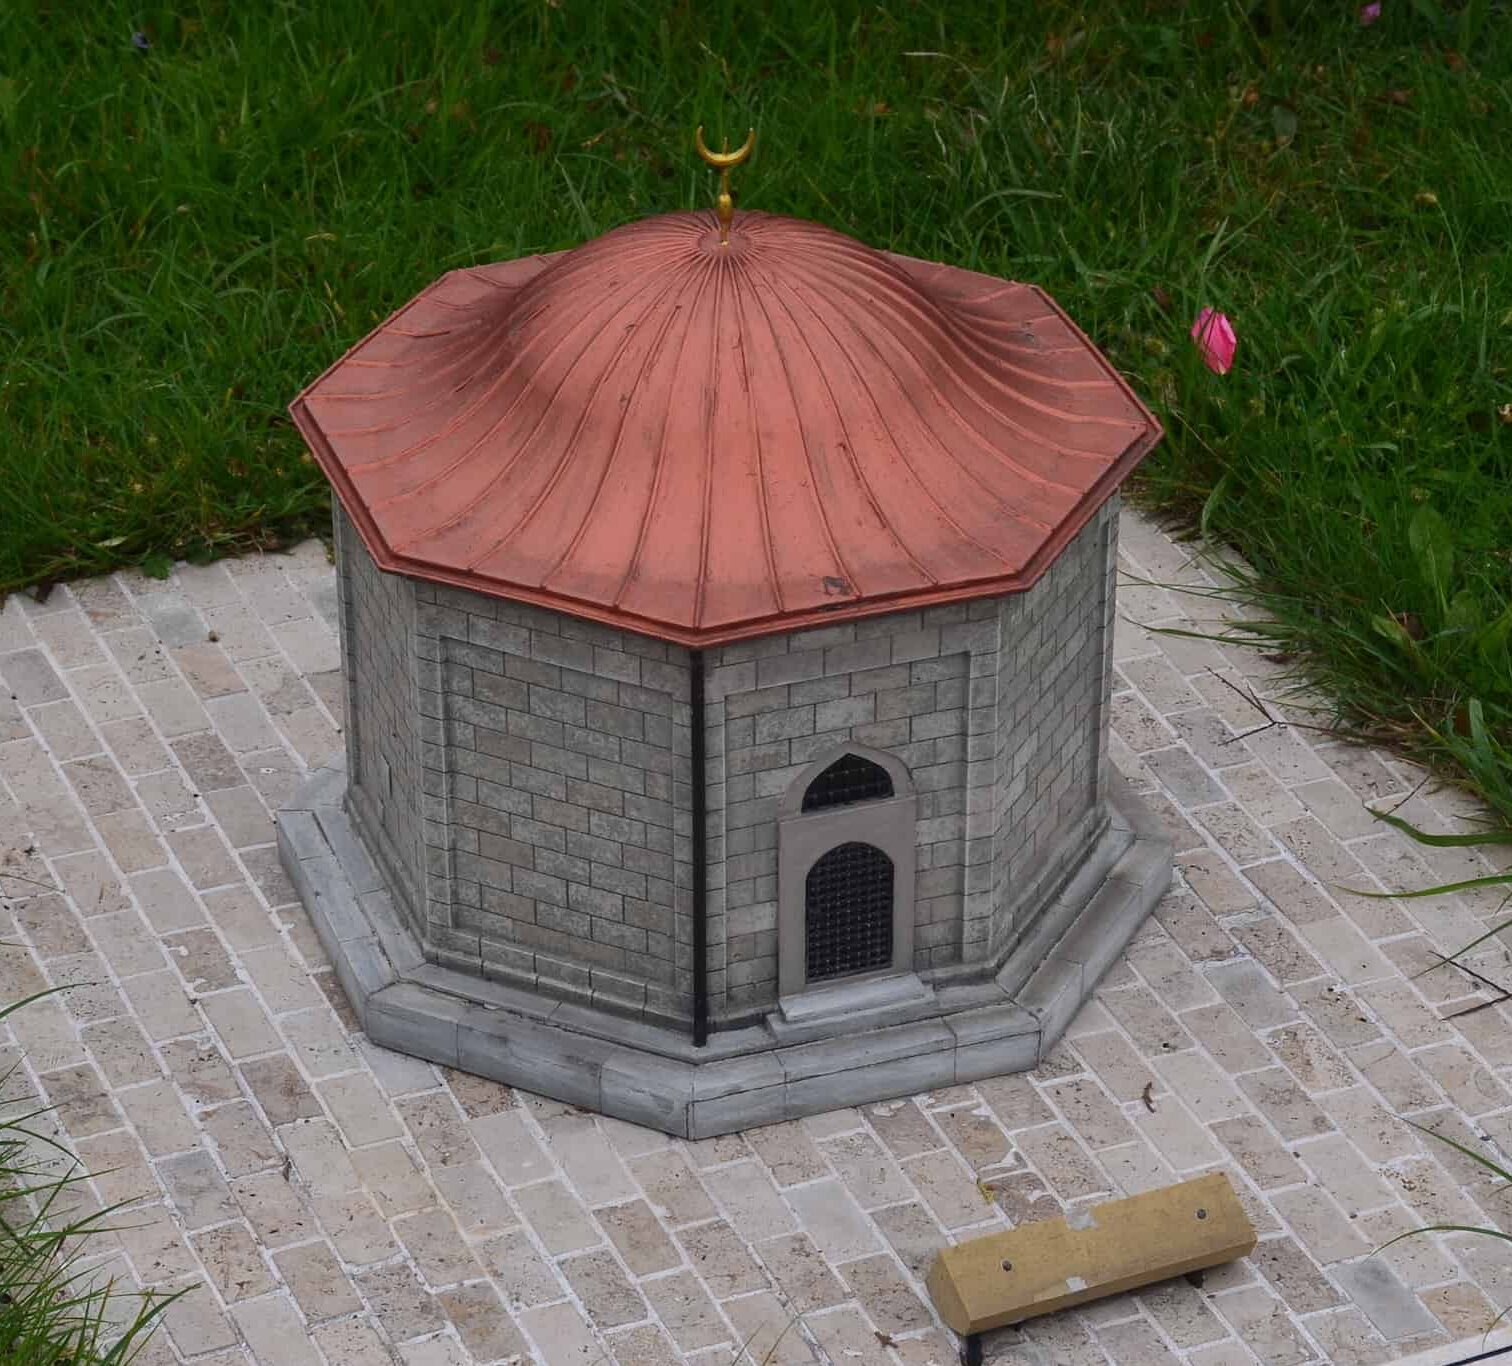 Model of the Tomb of Gül Baba, Budapest, Hungary, 16th century at Miniatürk in Istanbul, Turkey